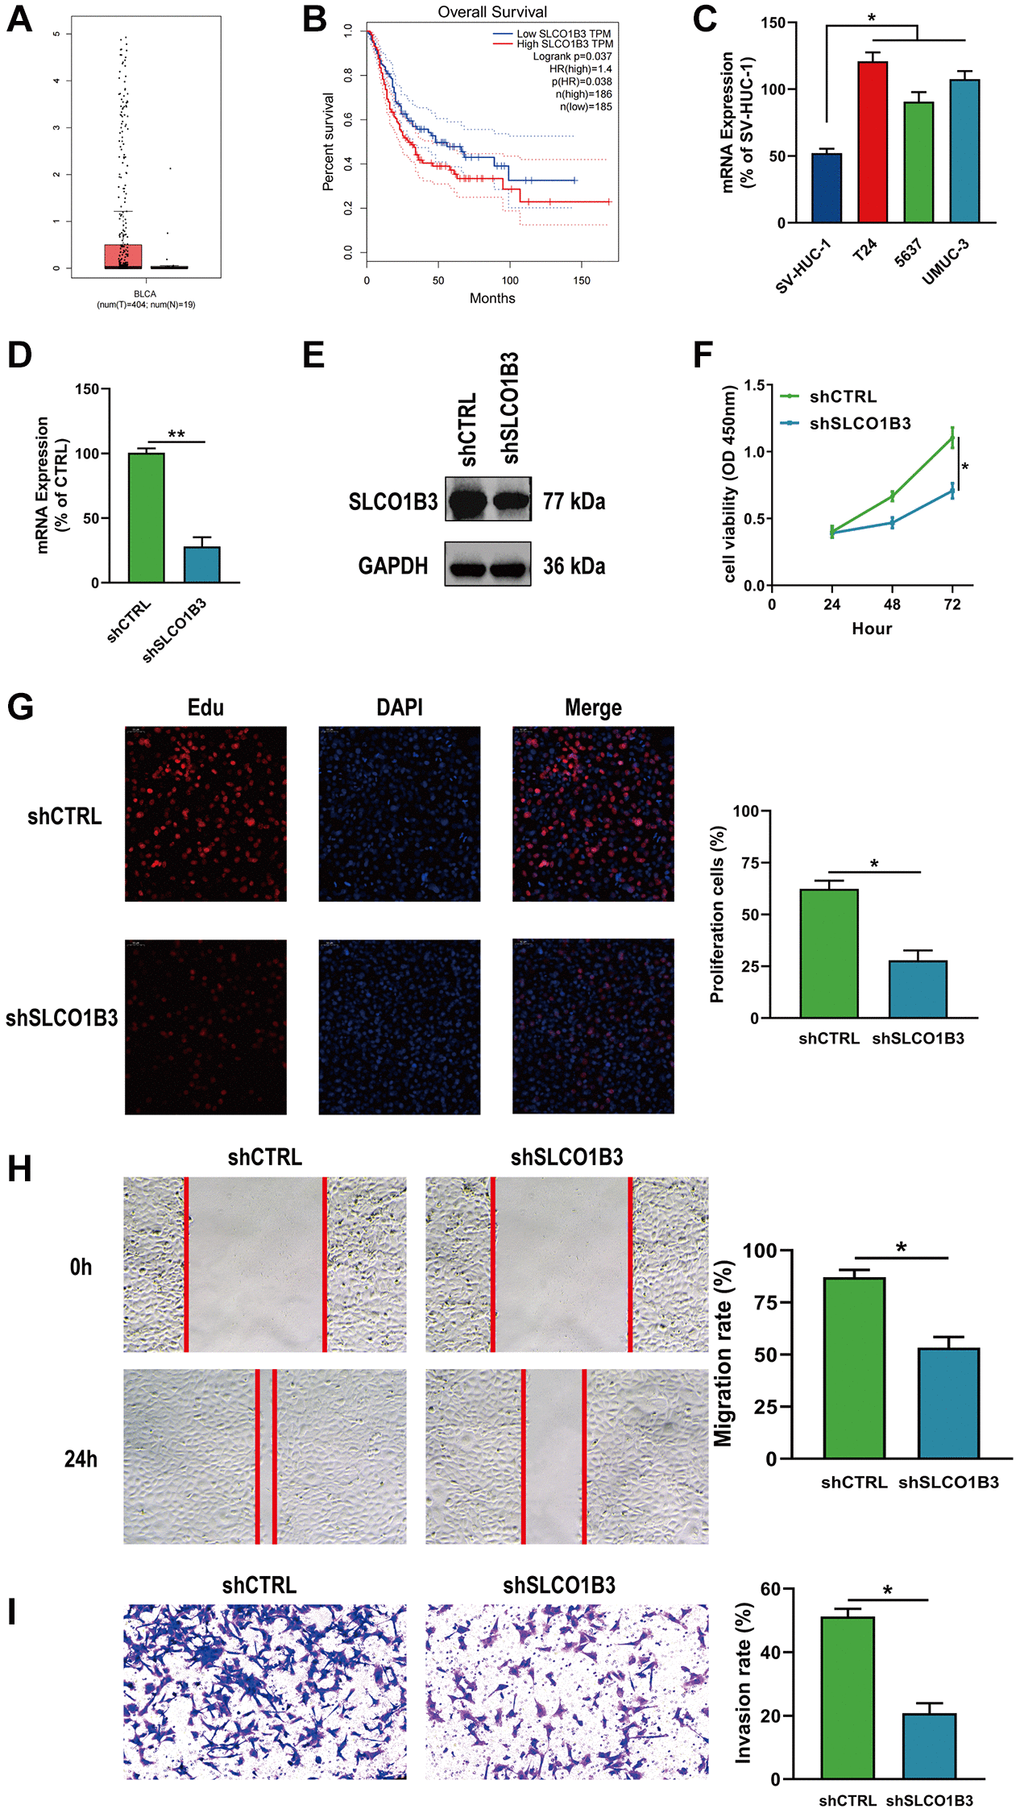 Downregulation of SLCO1B3 inhibited the proliferation, migration, and invasion of BLCA cells. (A, B) Differential analysis and survival analysis of SLCO1B3. (C) The mRNA expression of SLCO1B3 in BLCA cells and normal bladder cells. (D, E) The knockdown efficiency of SLCO1B3 was confirmed by qRT–PCR and western blotting. (F, G) CCK-8 and EdU assay for the proliferation ability. (H) Wound healing assay for the migration ability. (I) Transwell assay for the invasion ability. *P **P 